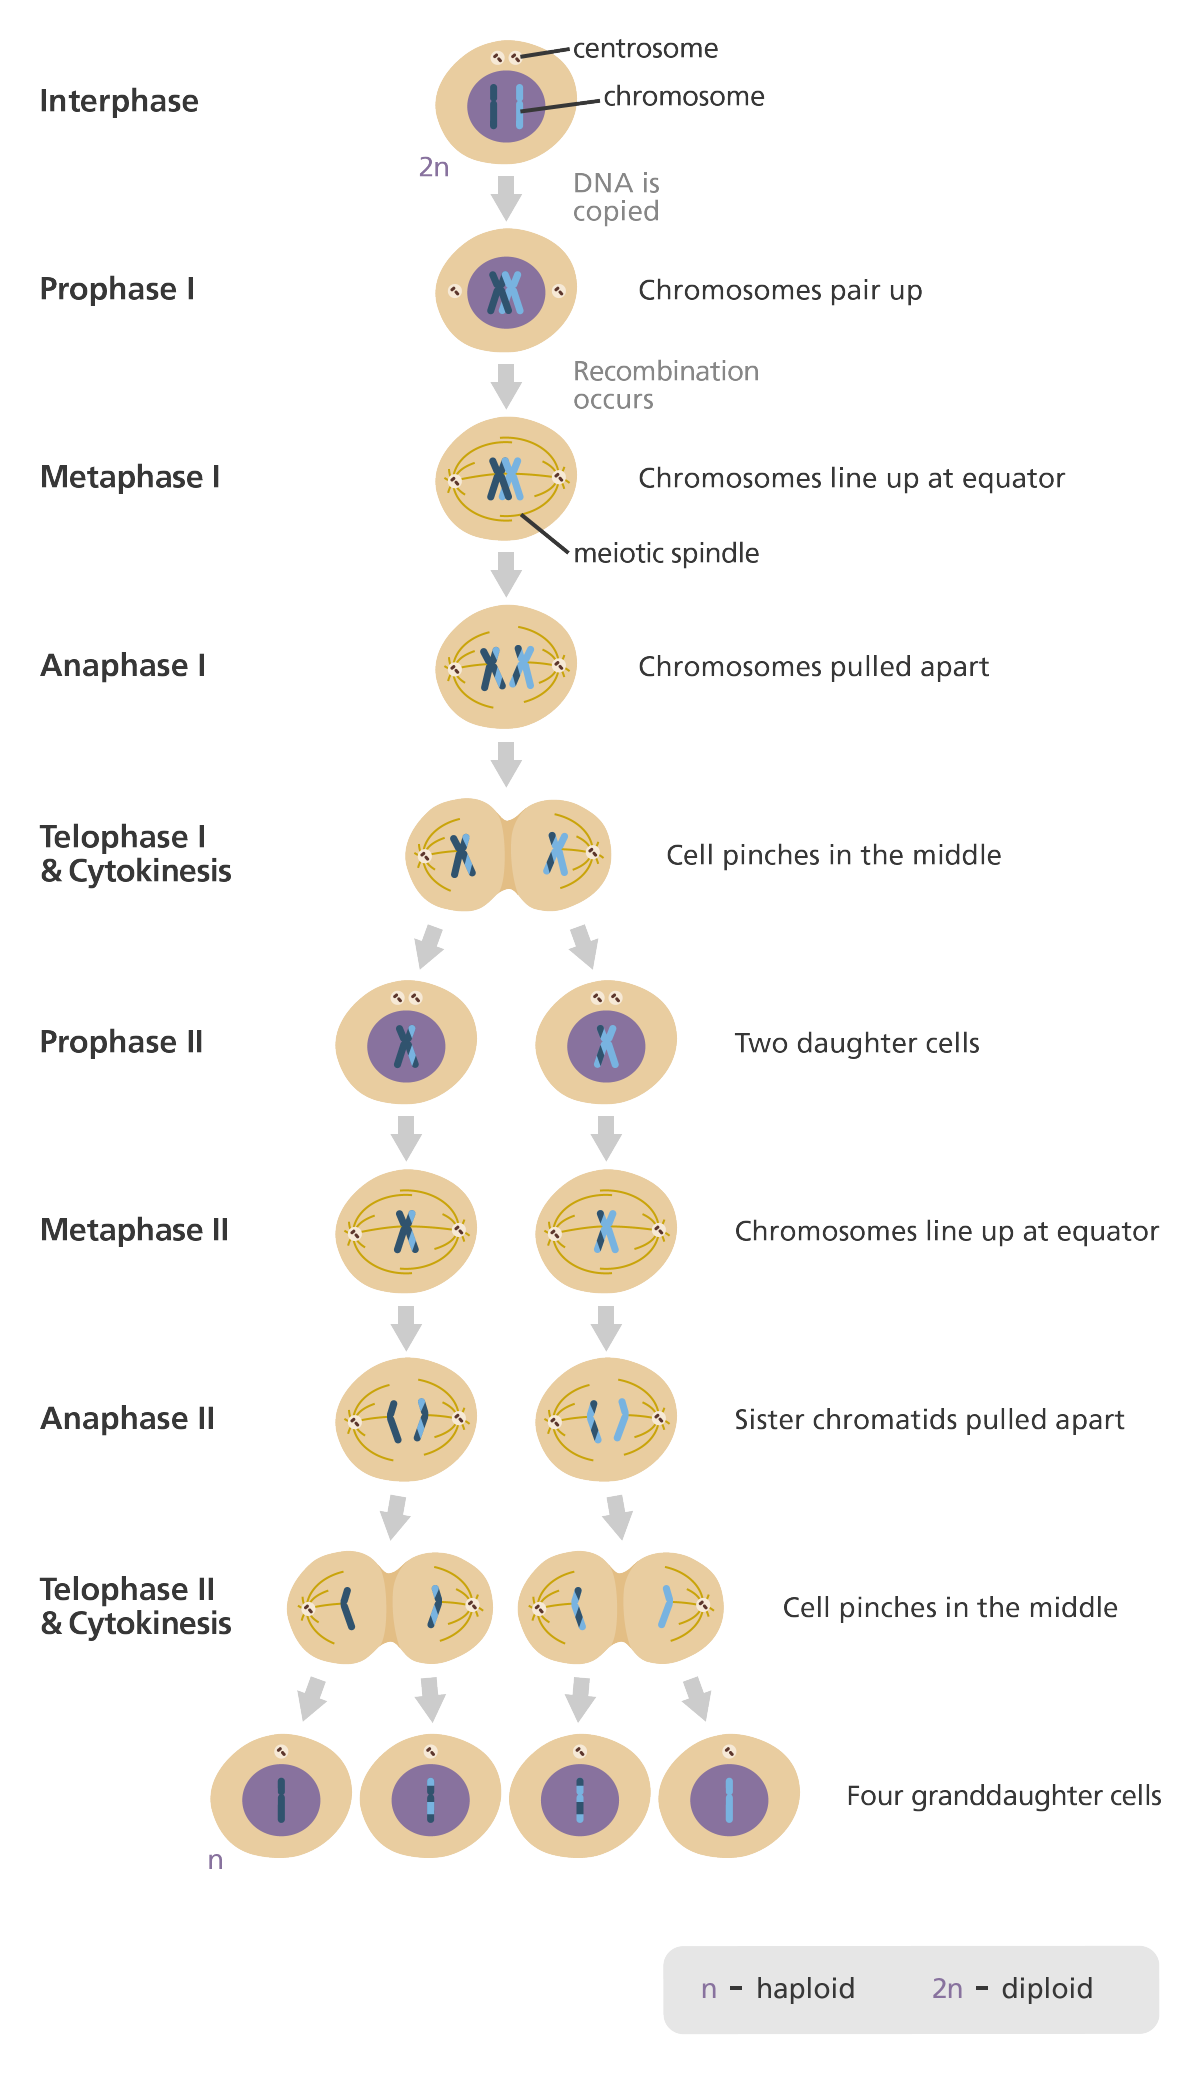 http://www.yourgenome.org/facts/what-is-meiosis